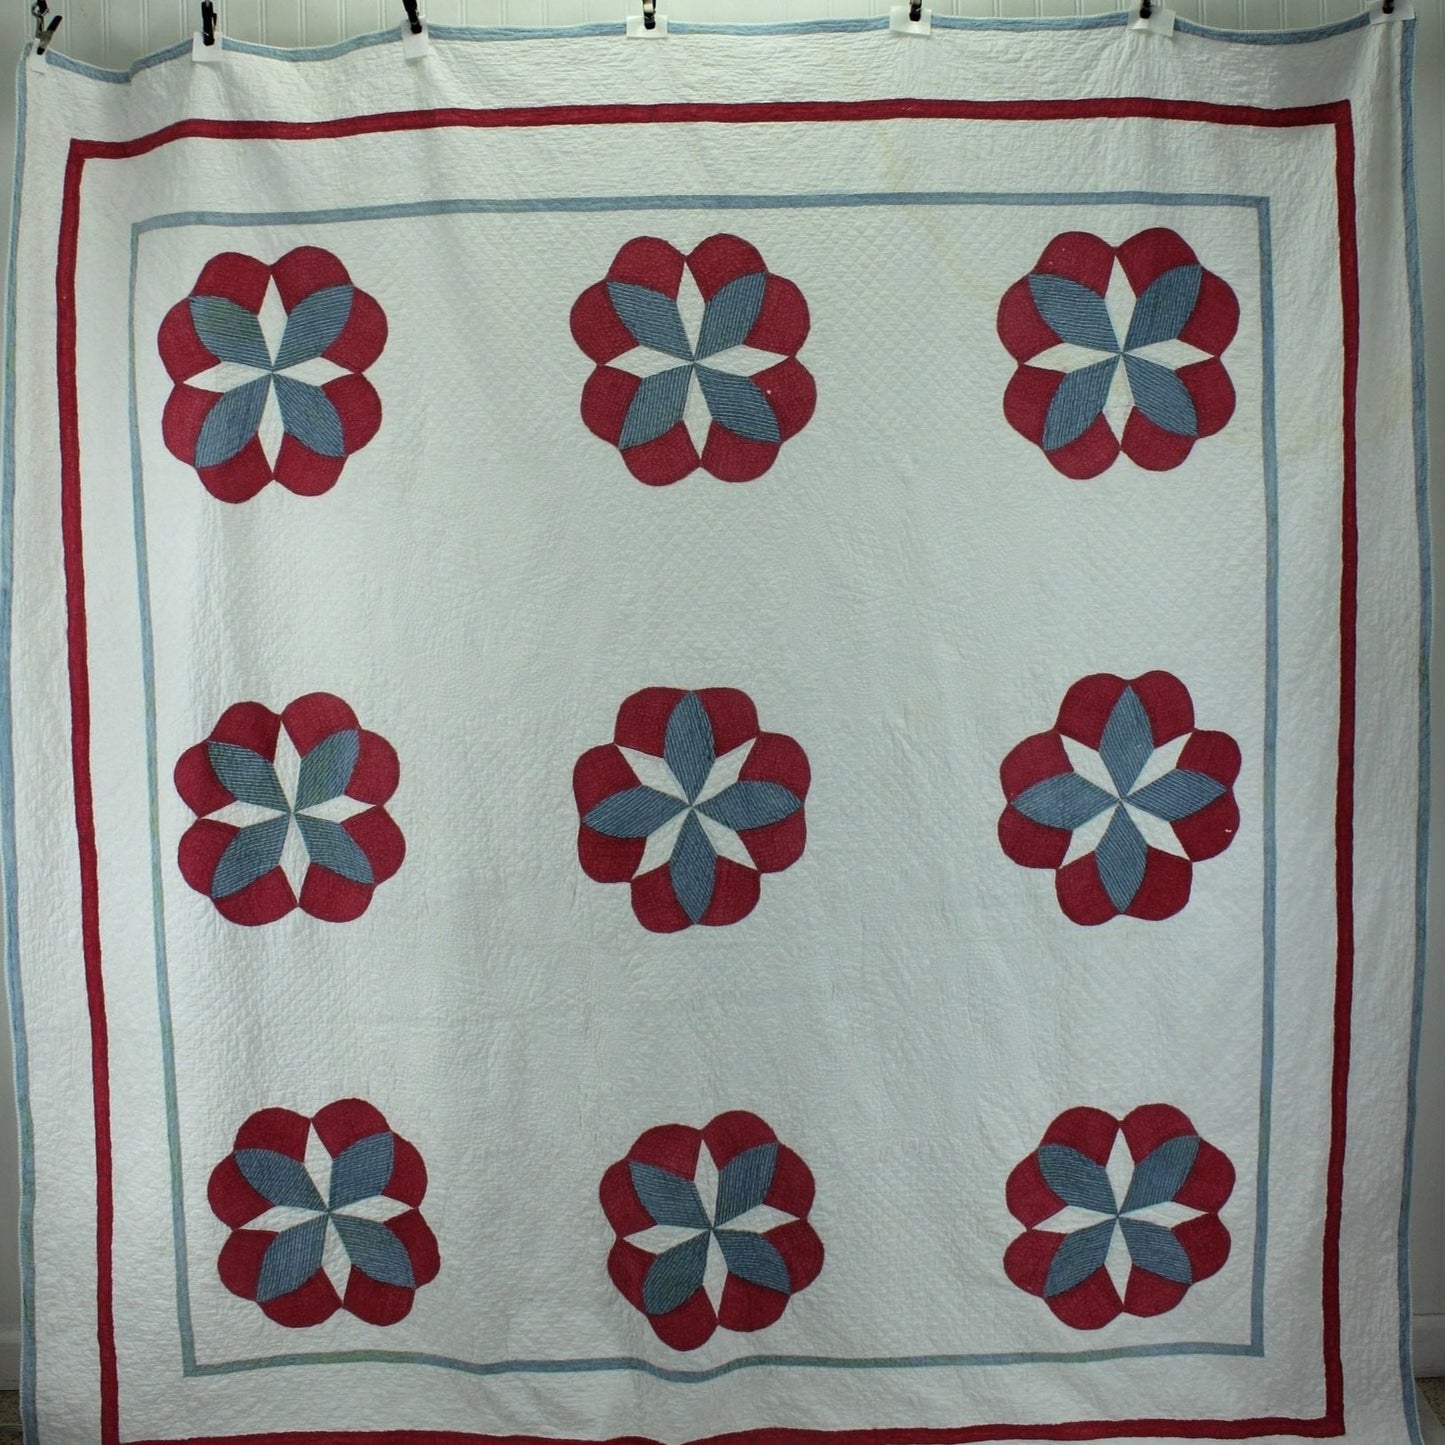 Antique Intricate Hand Stitched Quilt - Early 1900s Cotton Red Blue 9 Design - Natural Cotton Fill